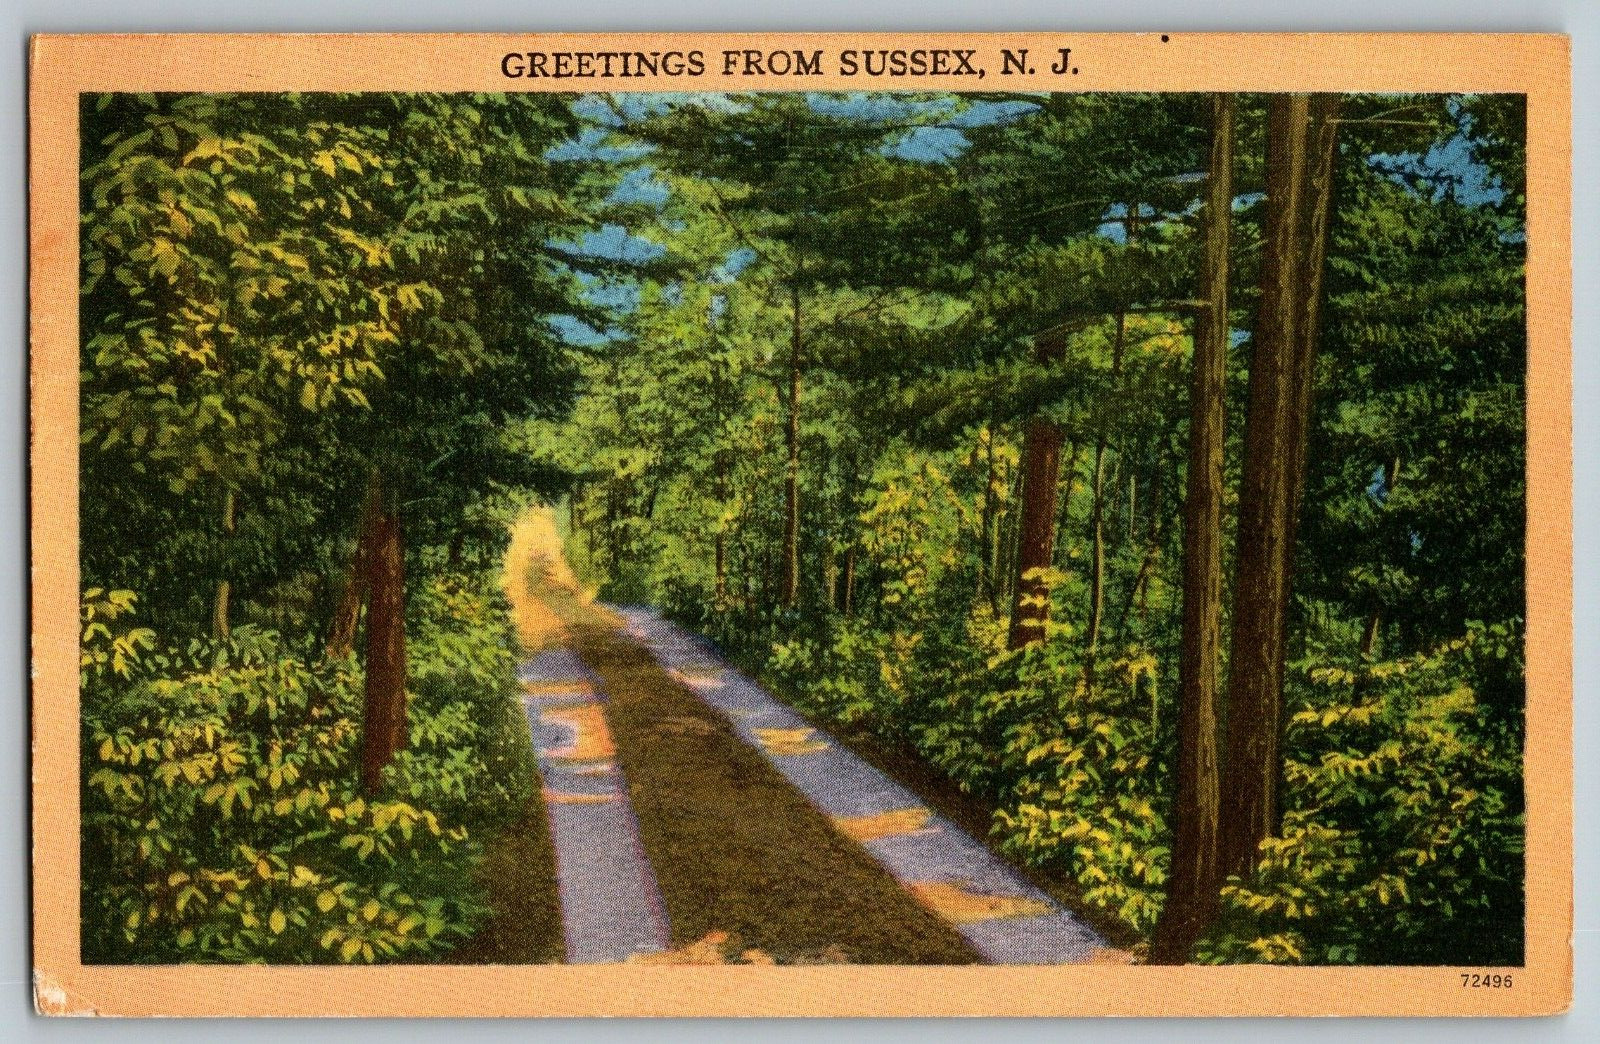 New Jersey - Greetings from Sussex, New Jersey - Vintage Postcard - Posted